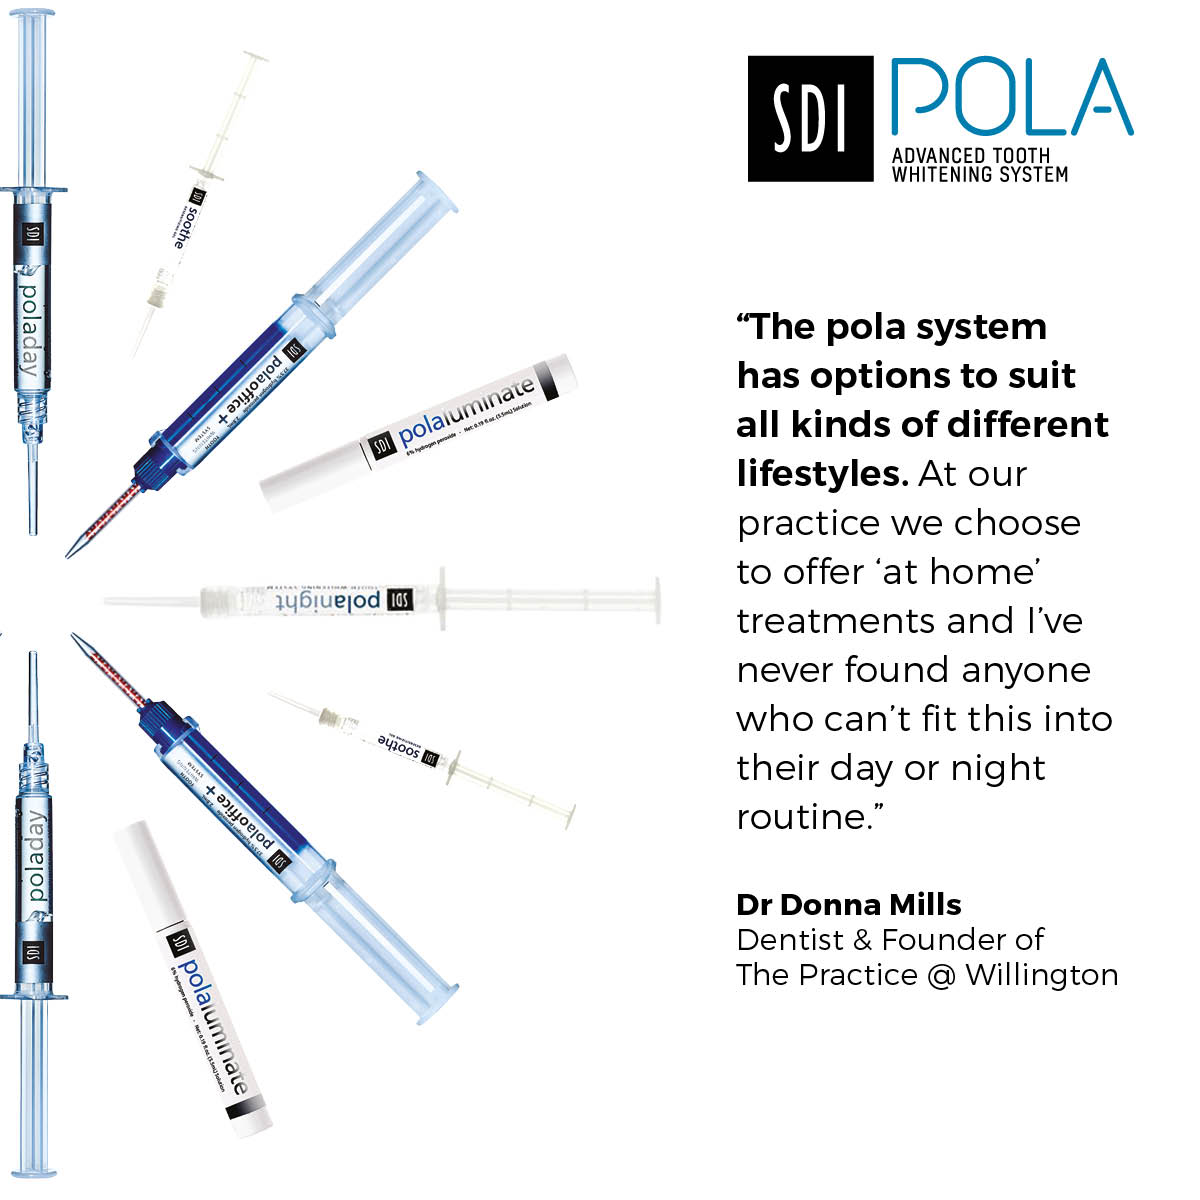 If you'd like to offer your patients the best in at-home whitening, why not find out more about poladay and polanight at sdipola.co.uk/products/polad… #AtHomeWhitening #SDIpola #CosmeticDentistry #ToothBleaching